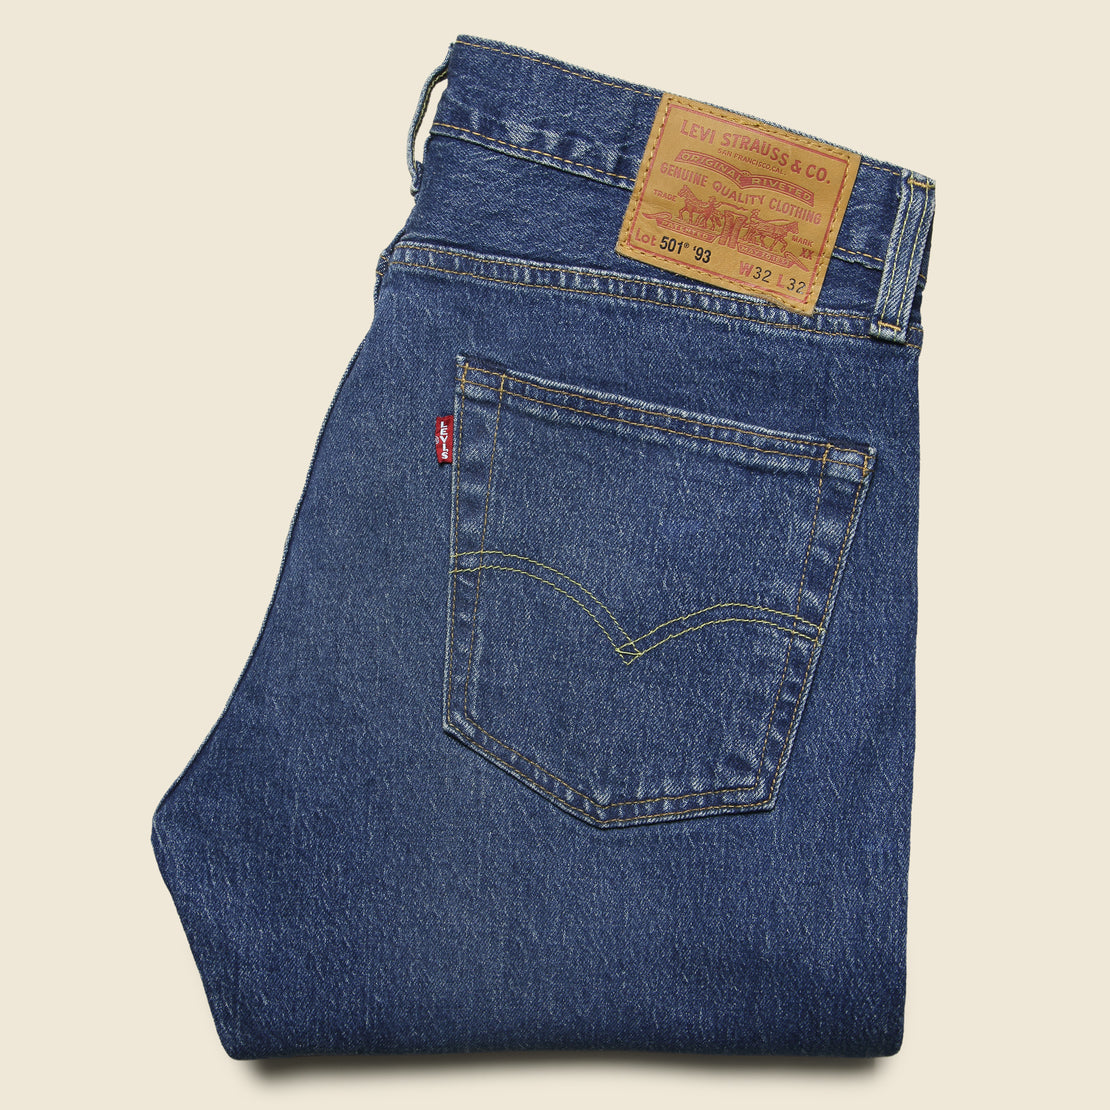 baby 501 jeans online -